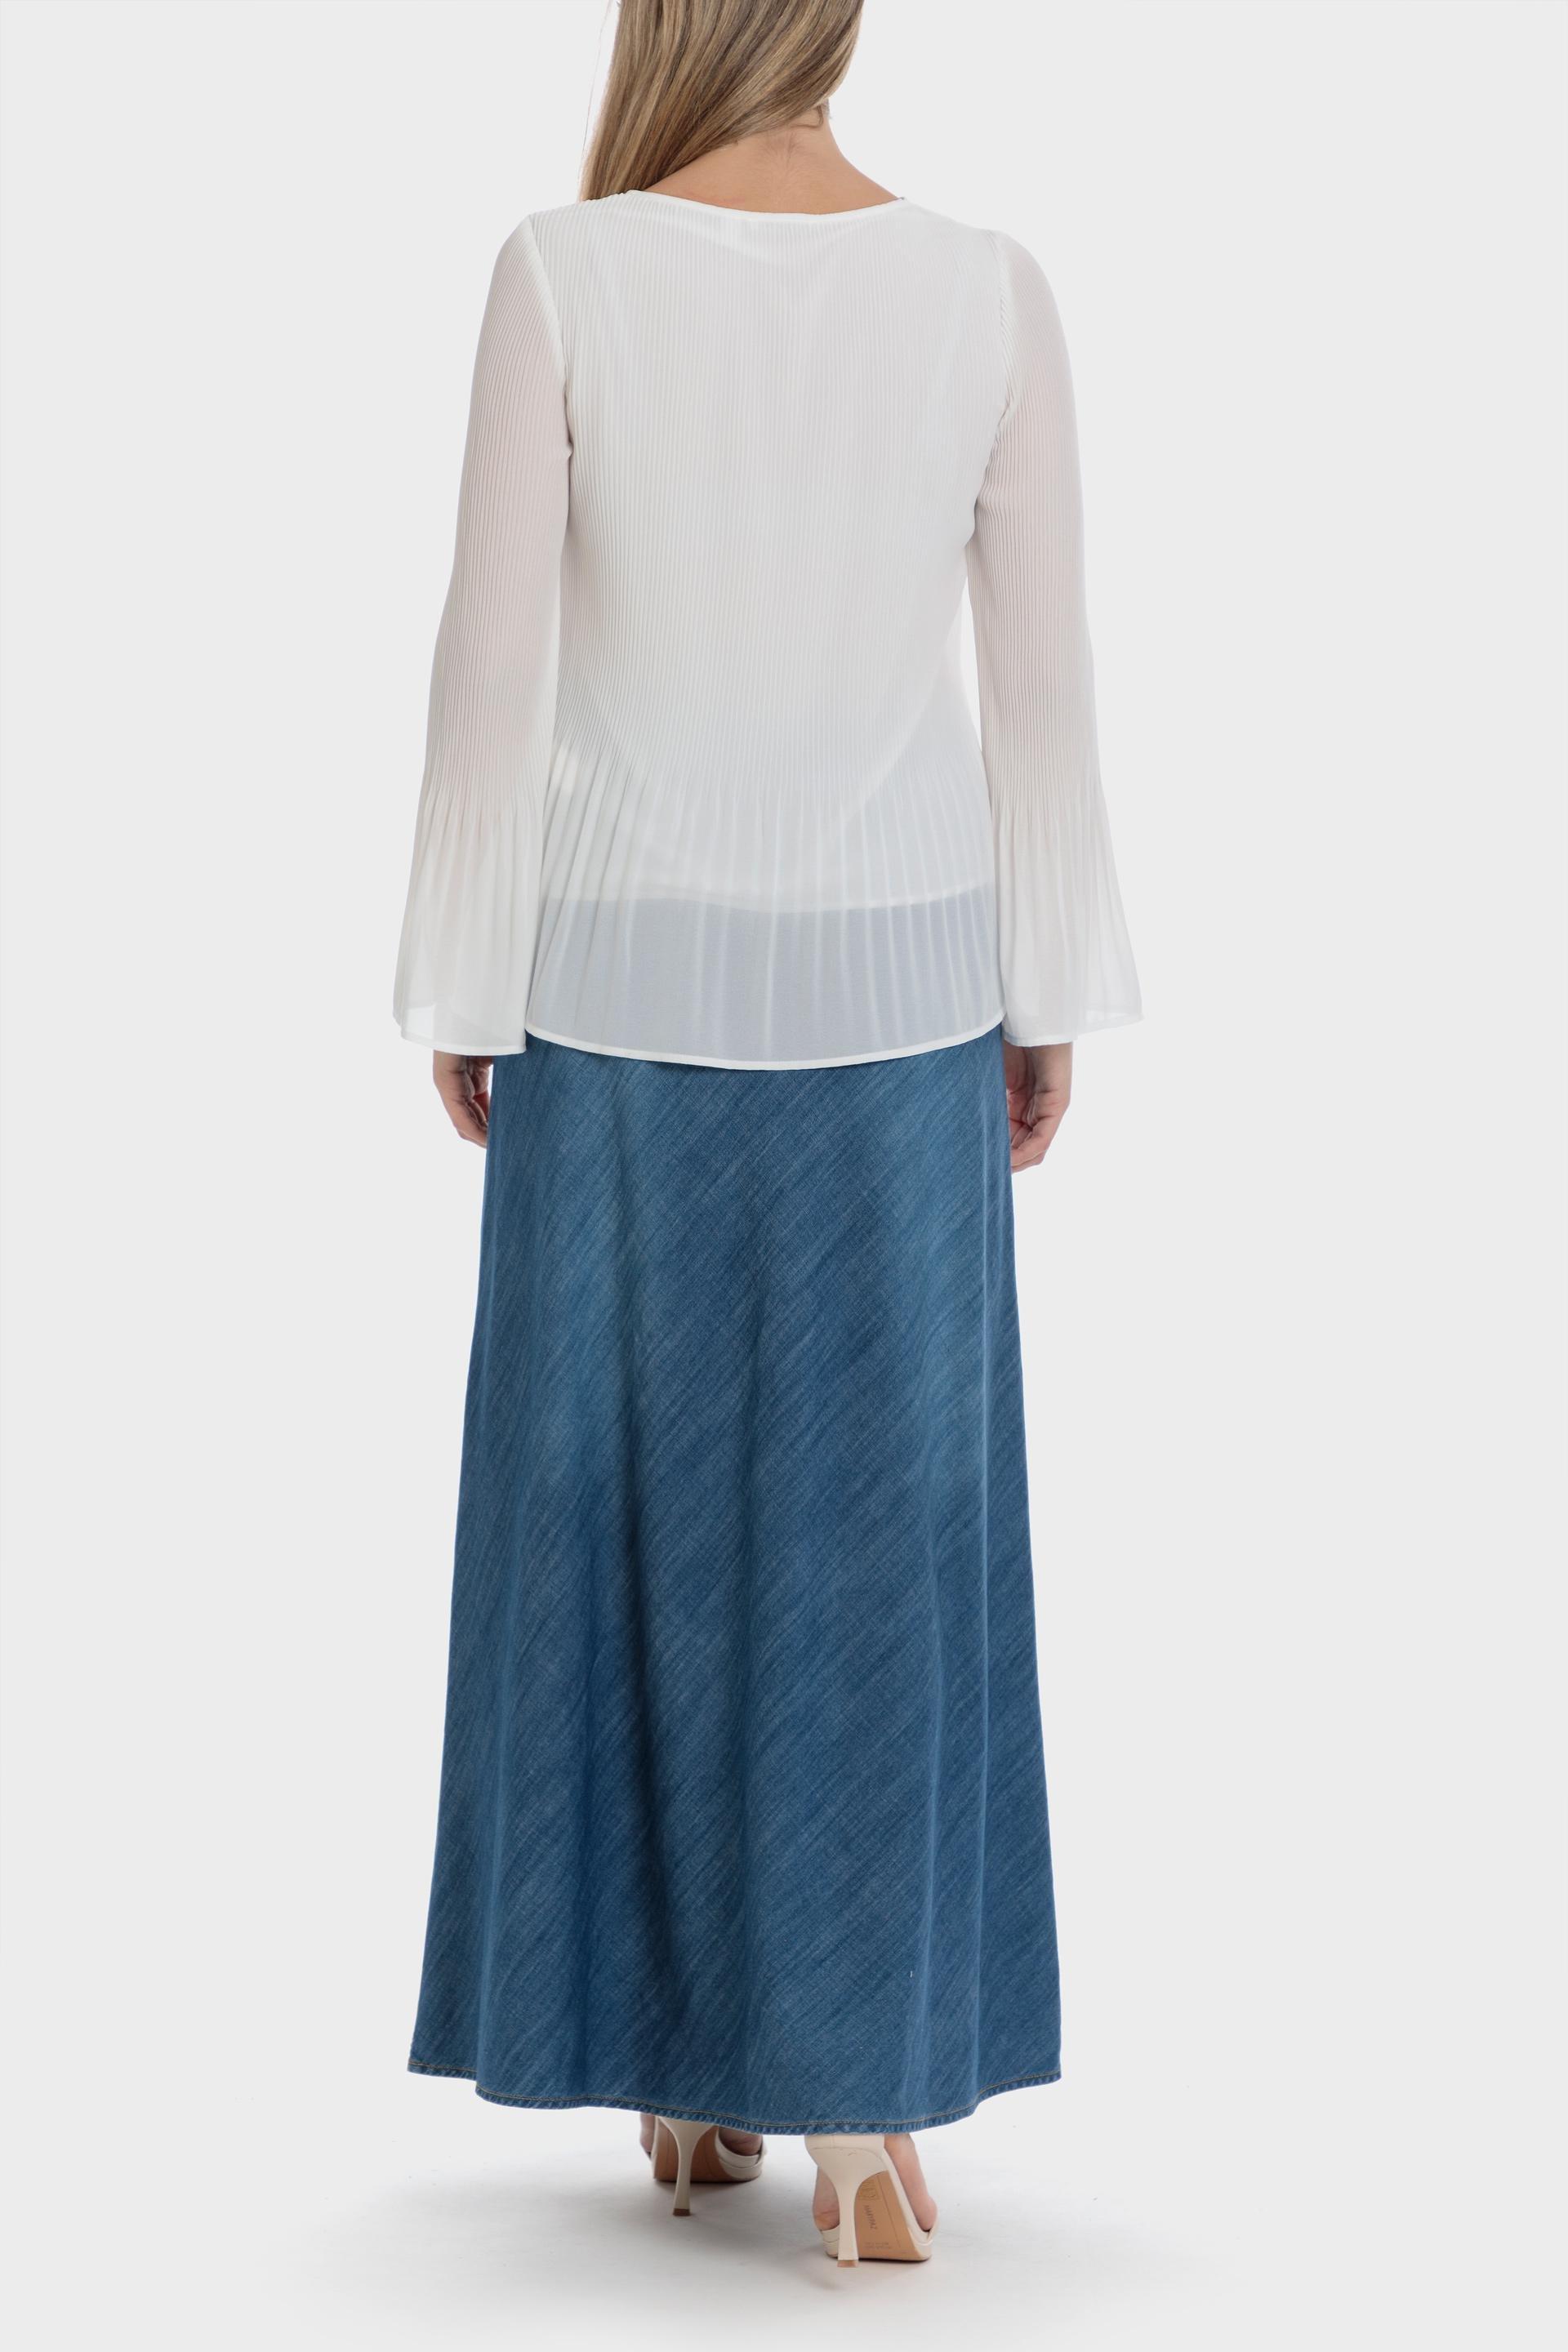 Punt Roma - White Pleated Loose Fitting Blouse